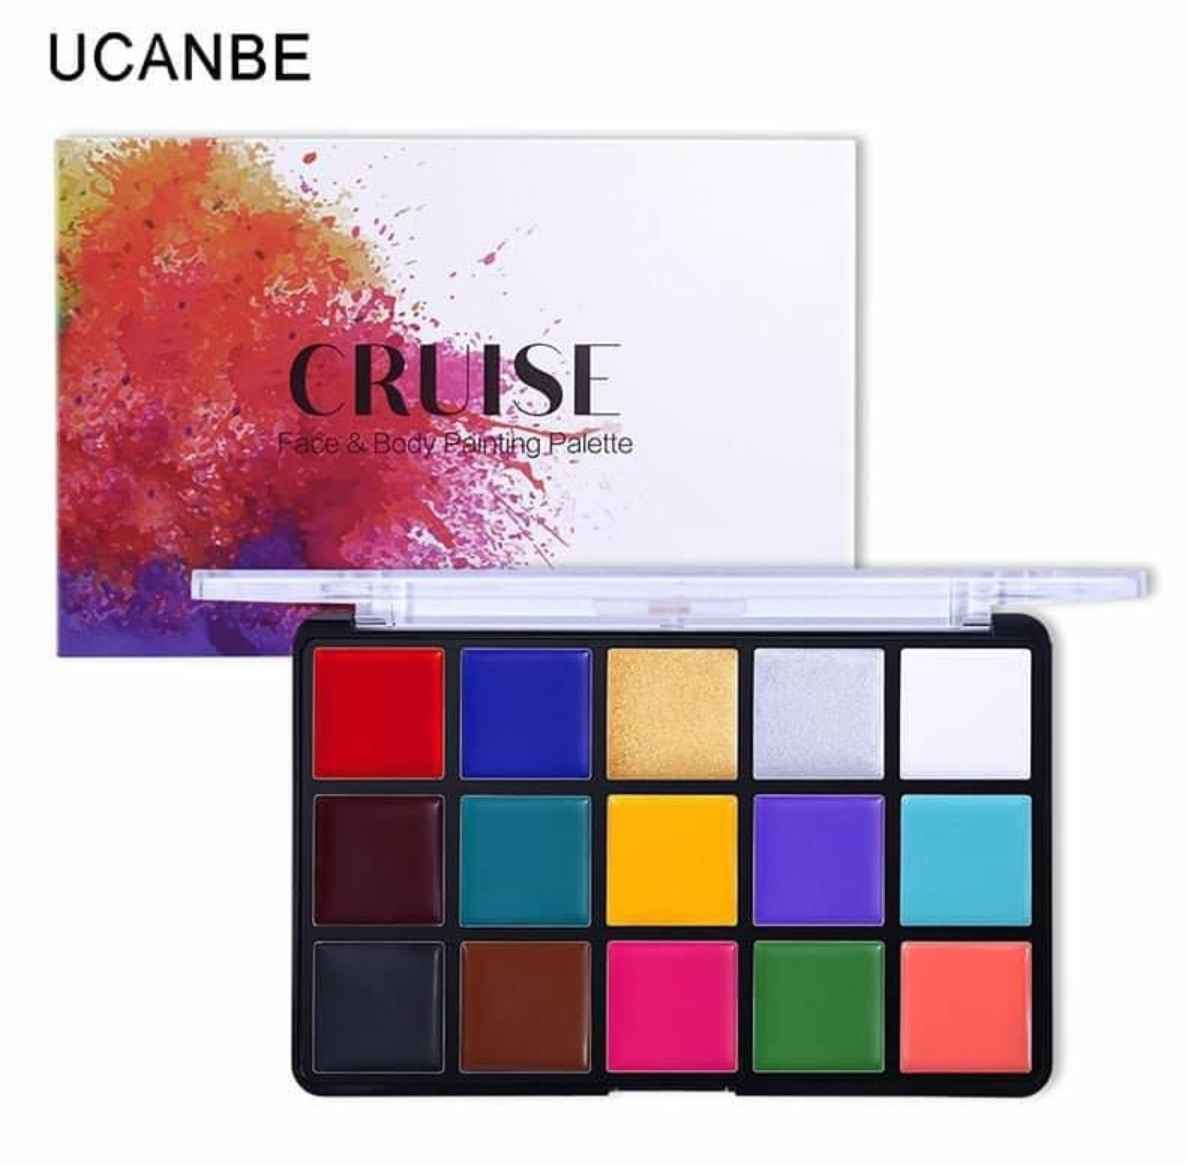 UCANBE FACE AND BODY CRUISE PAINTING PALLETE 